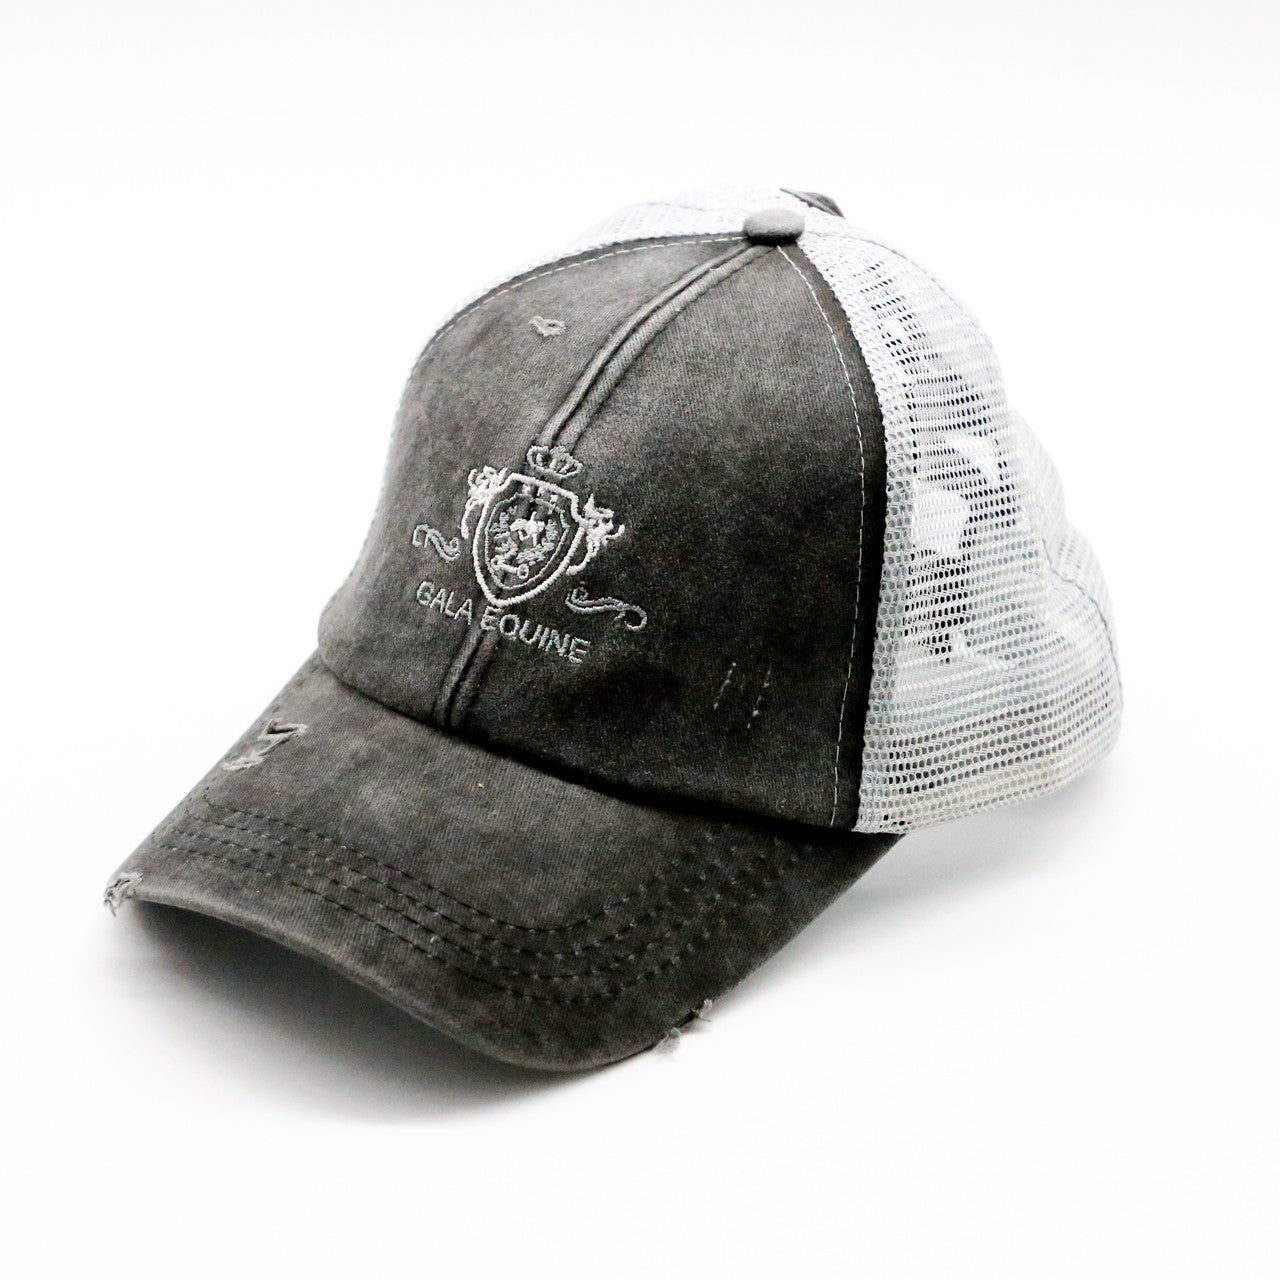 Cap - Distressed All Charcoal